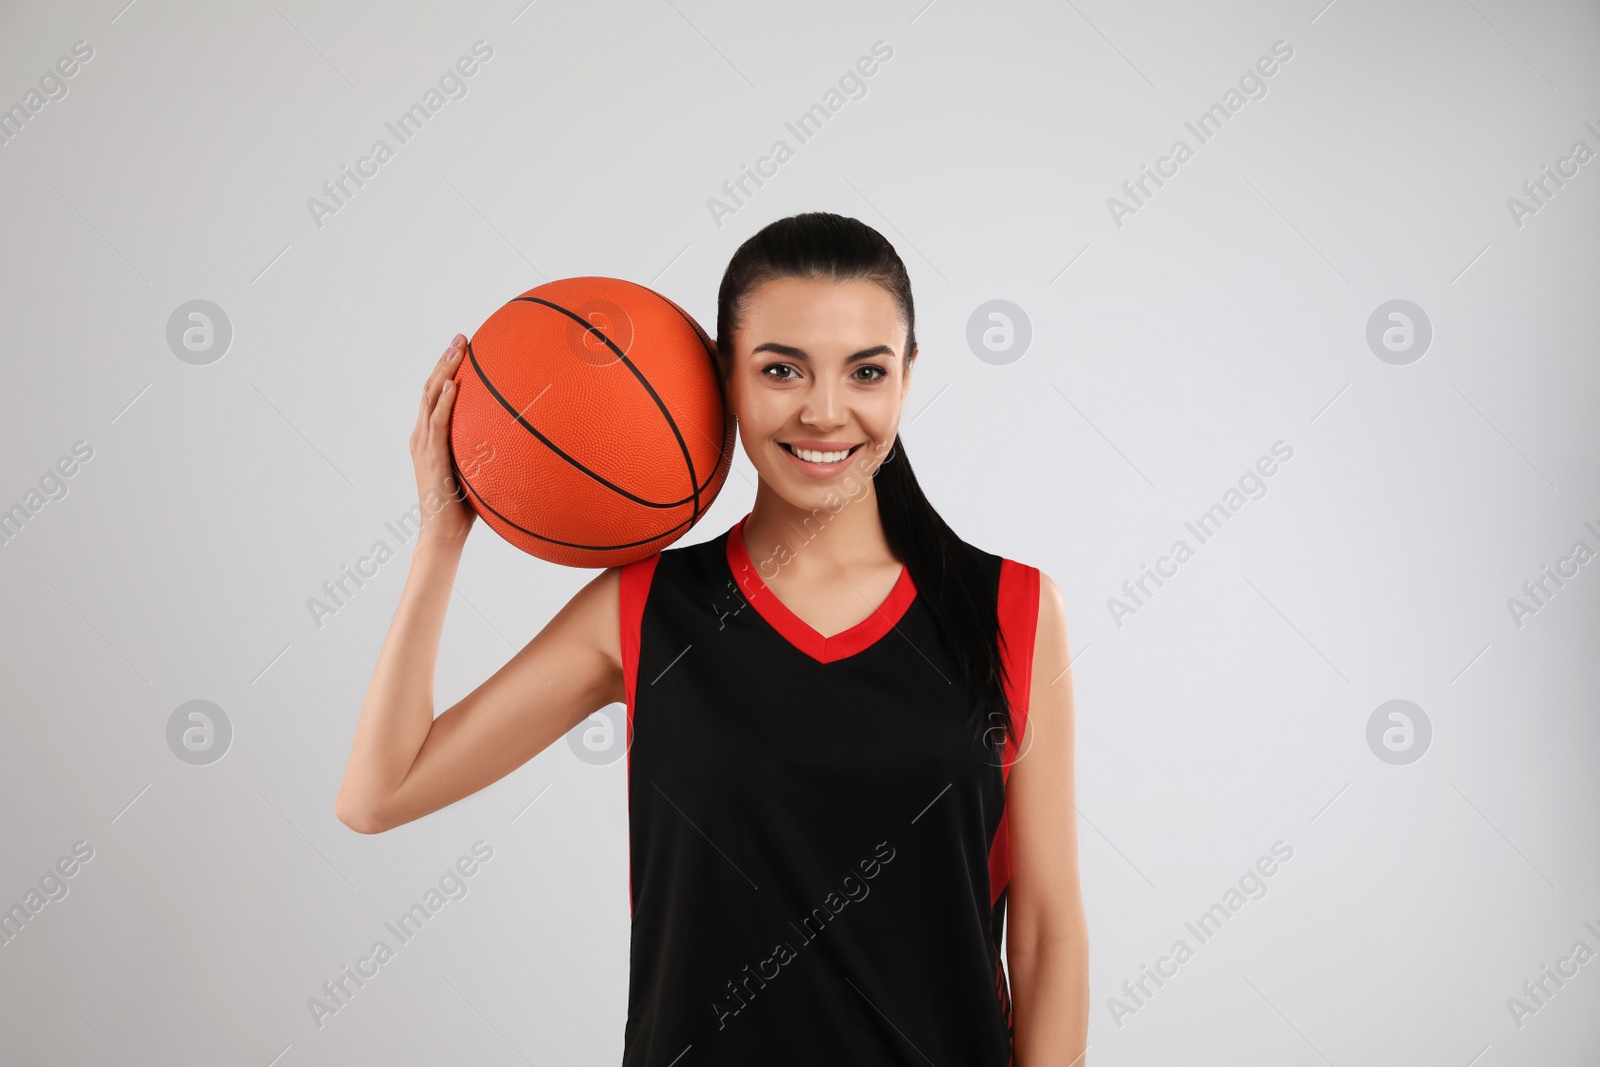 Photo of Basketball player with ball on grey background